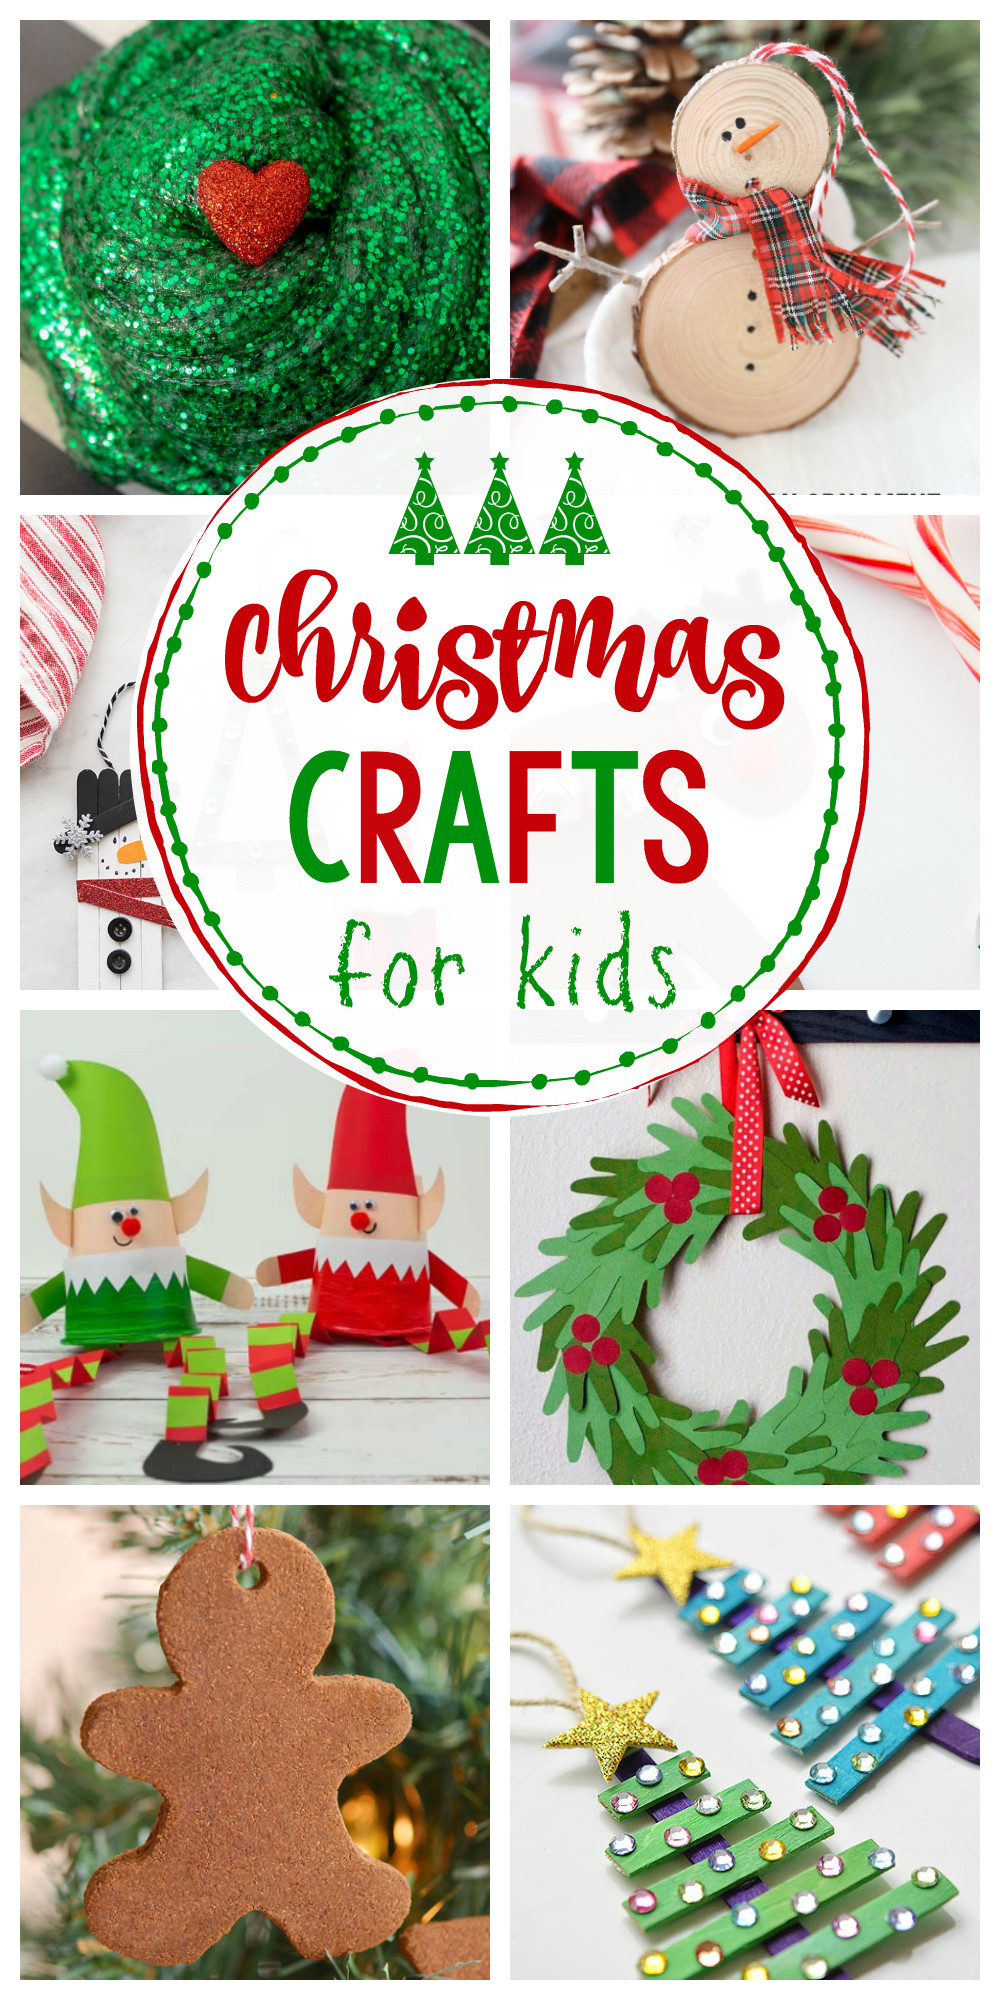 Toddler Christmas Craft Ideas
 25 Easy Christmas Crafts for Kids Crazy Little Projects